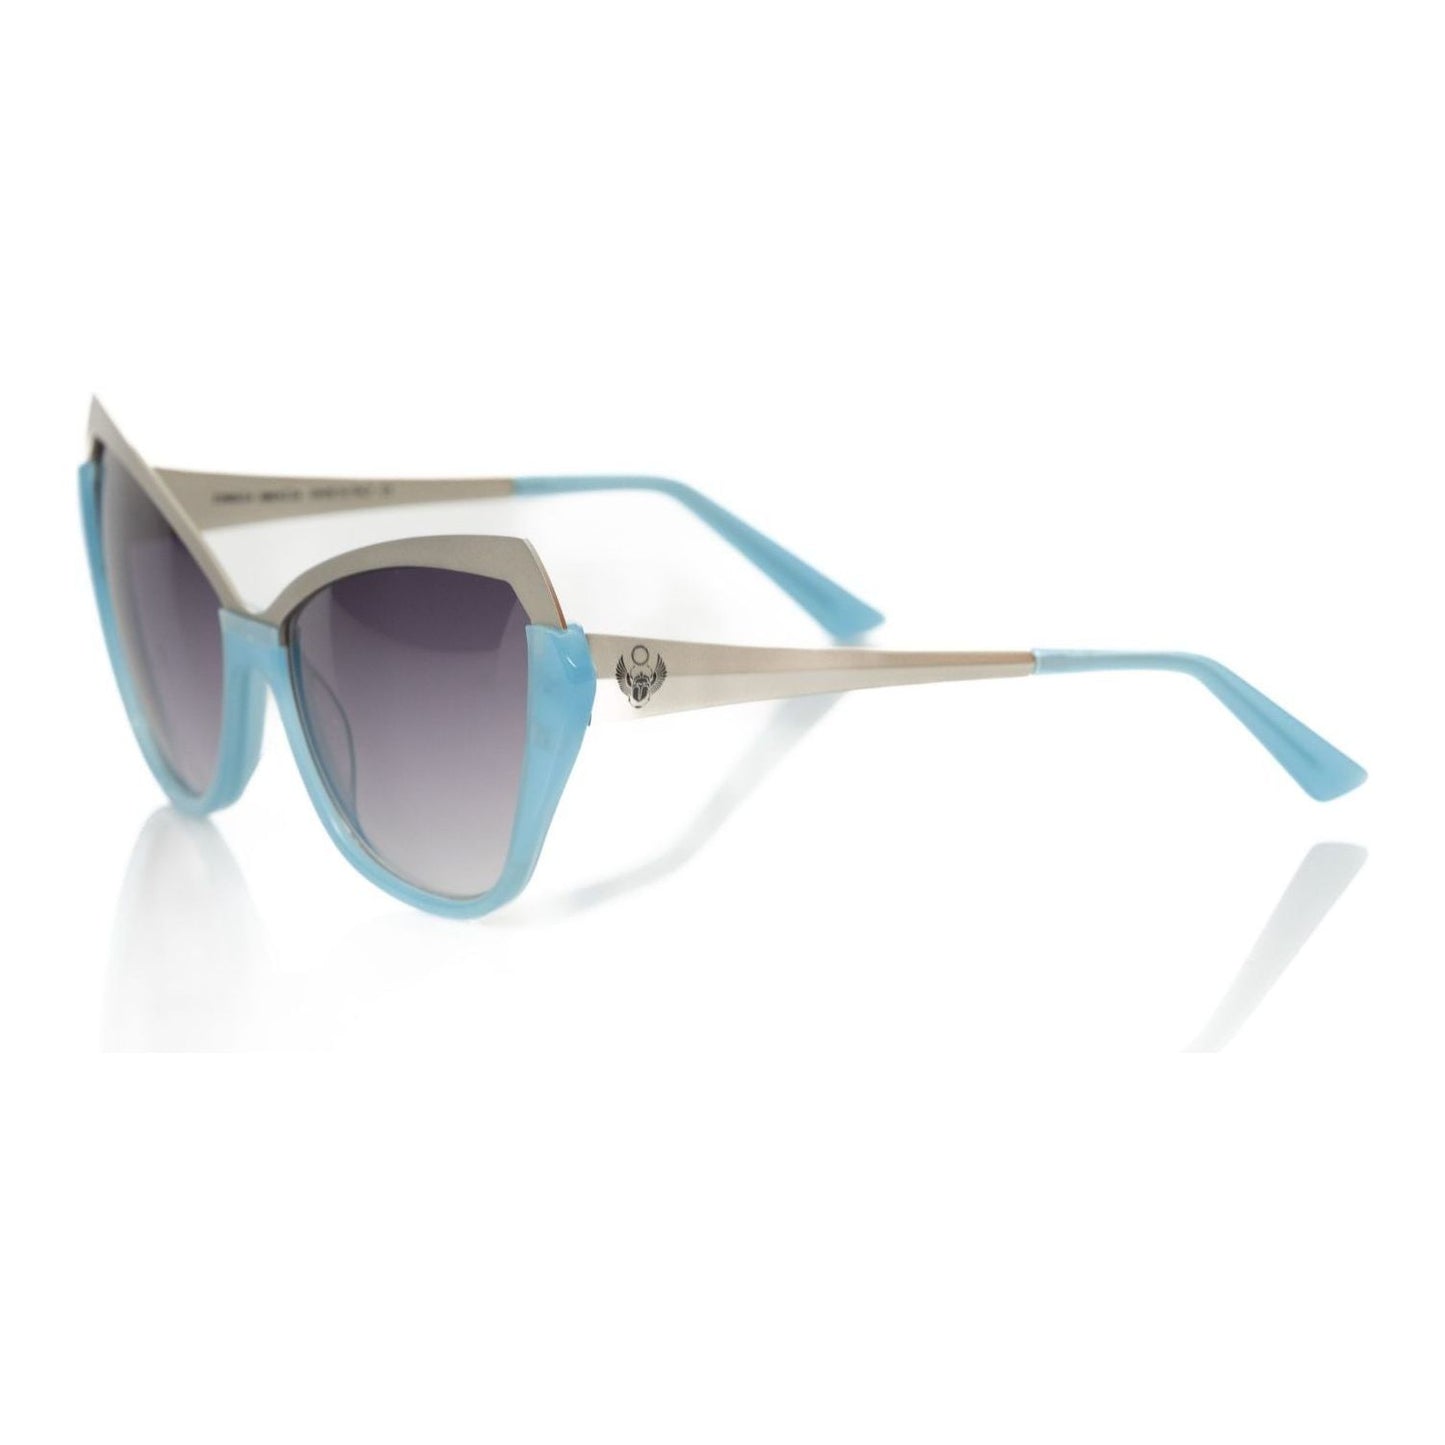 Frankie Morello Chic Cat Eye Shades with Metallic Accent light-blue-acetate-sunglasses